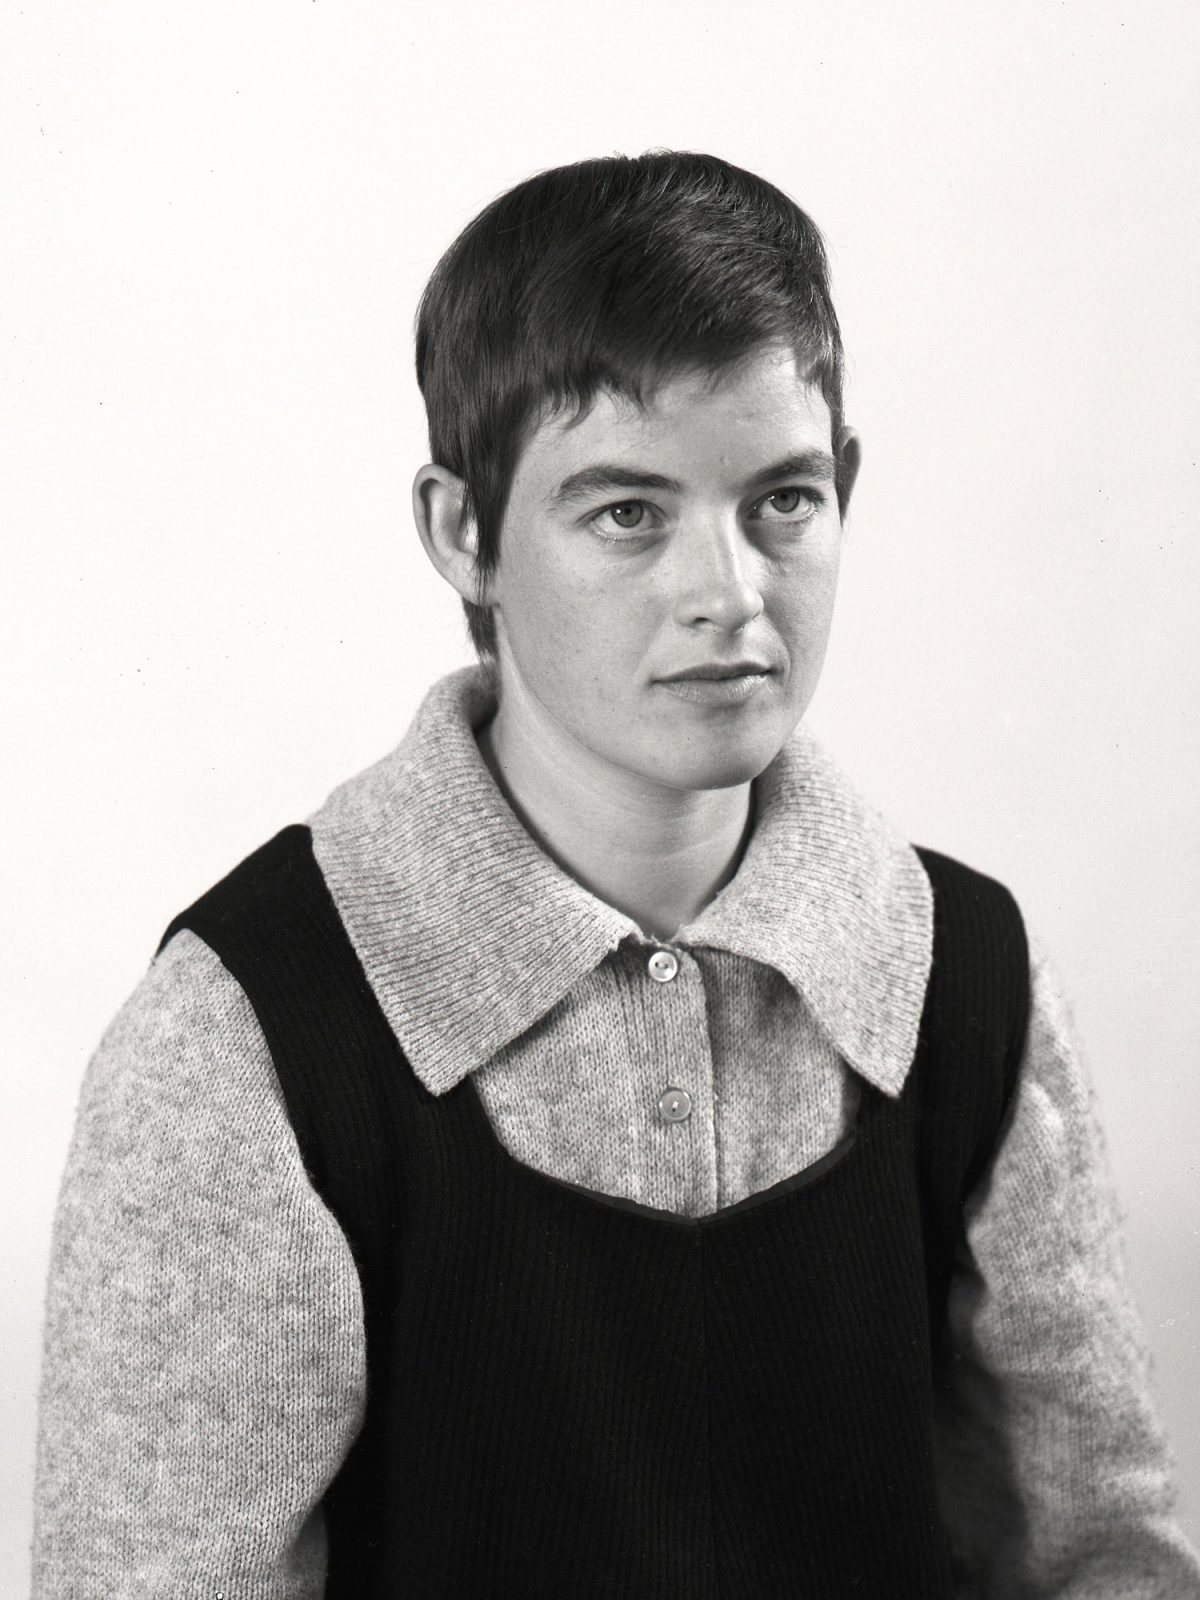 Young woman with cropped hair, dressed in knitted sweater and dark vest, Bitten Højmark.